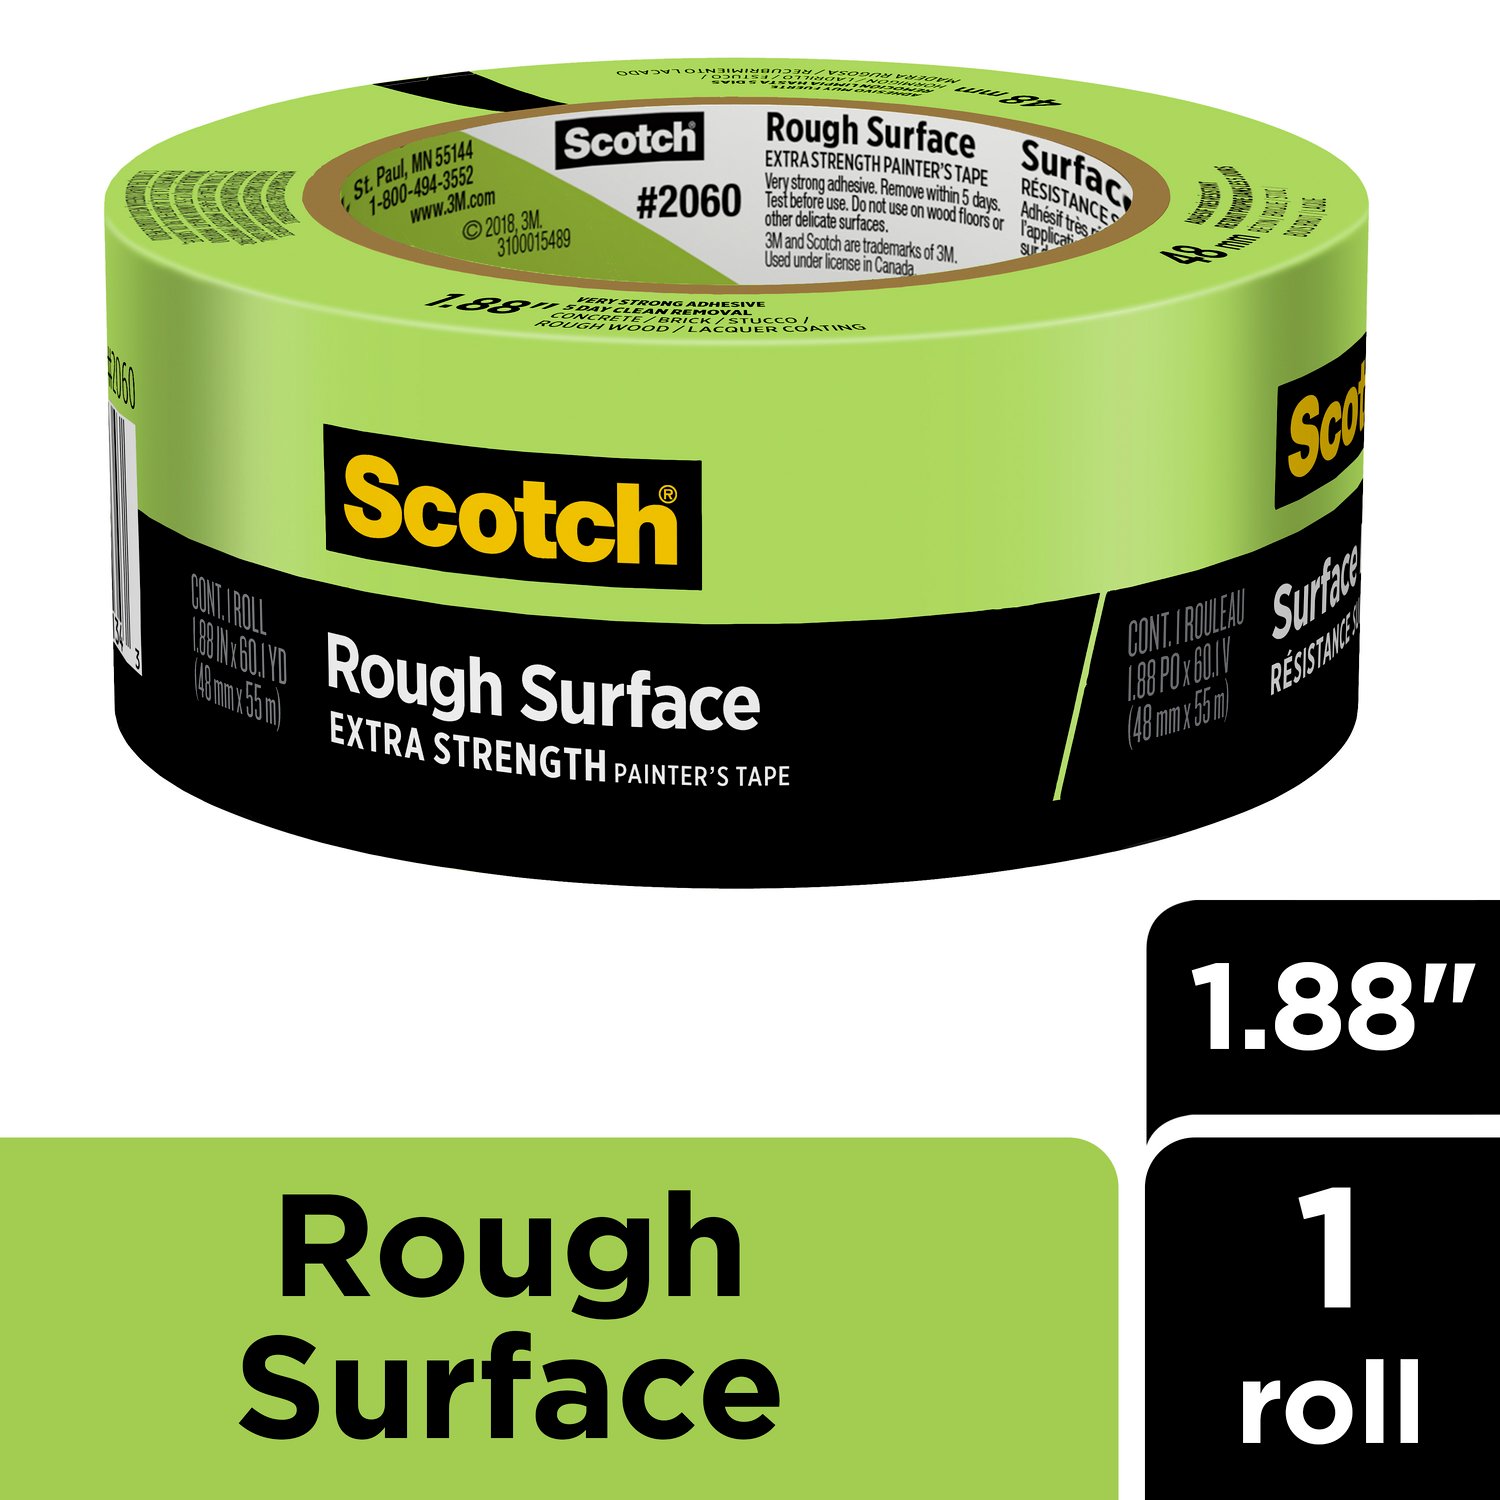 7100185557 - Scotch Rough Surface Painter's Tape 2060-48MP, 1.88 in x 60 yd (48mm x
55m)